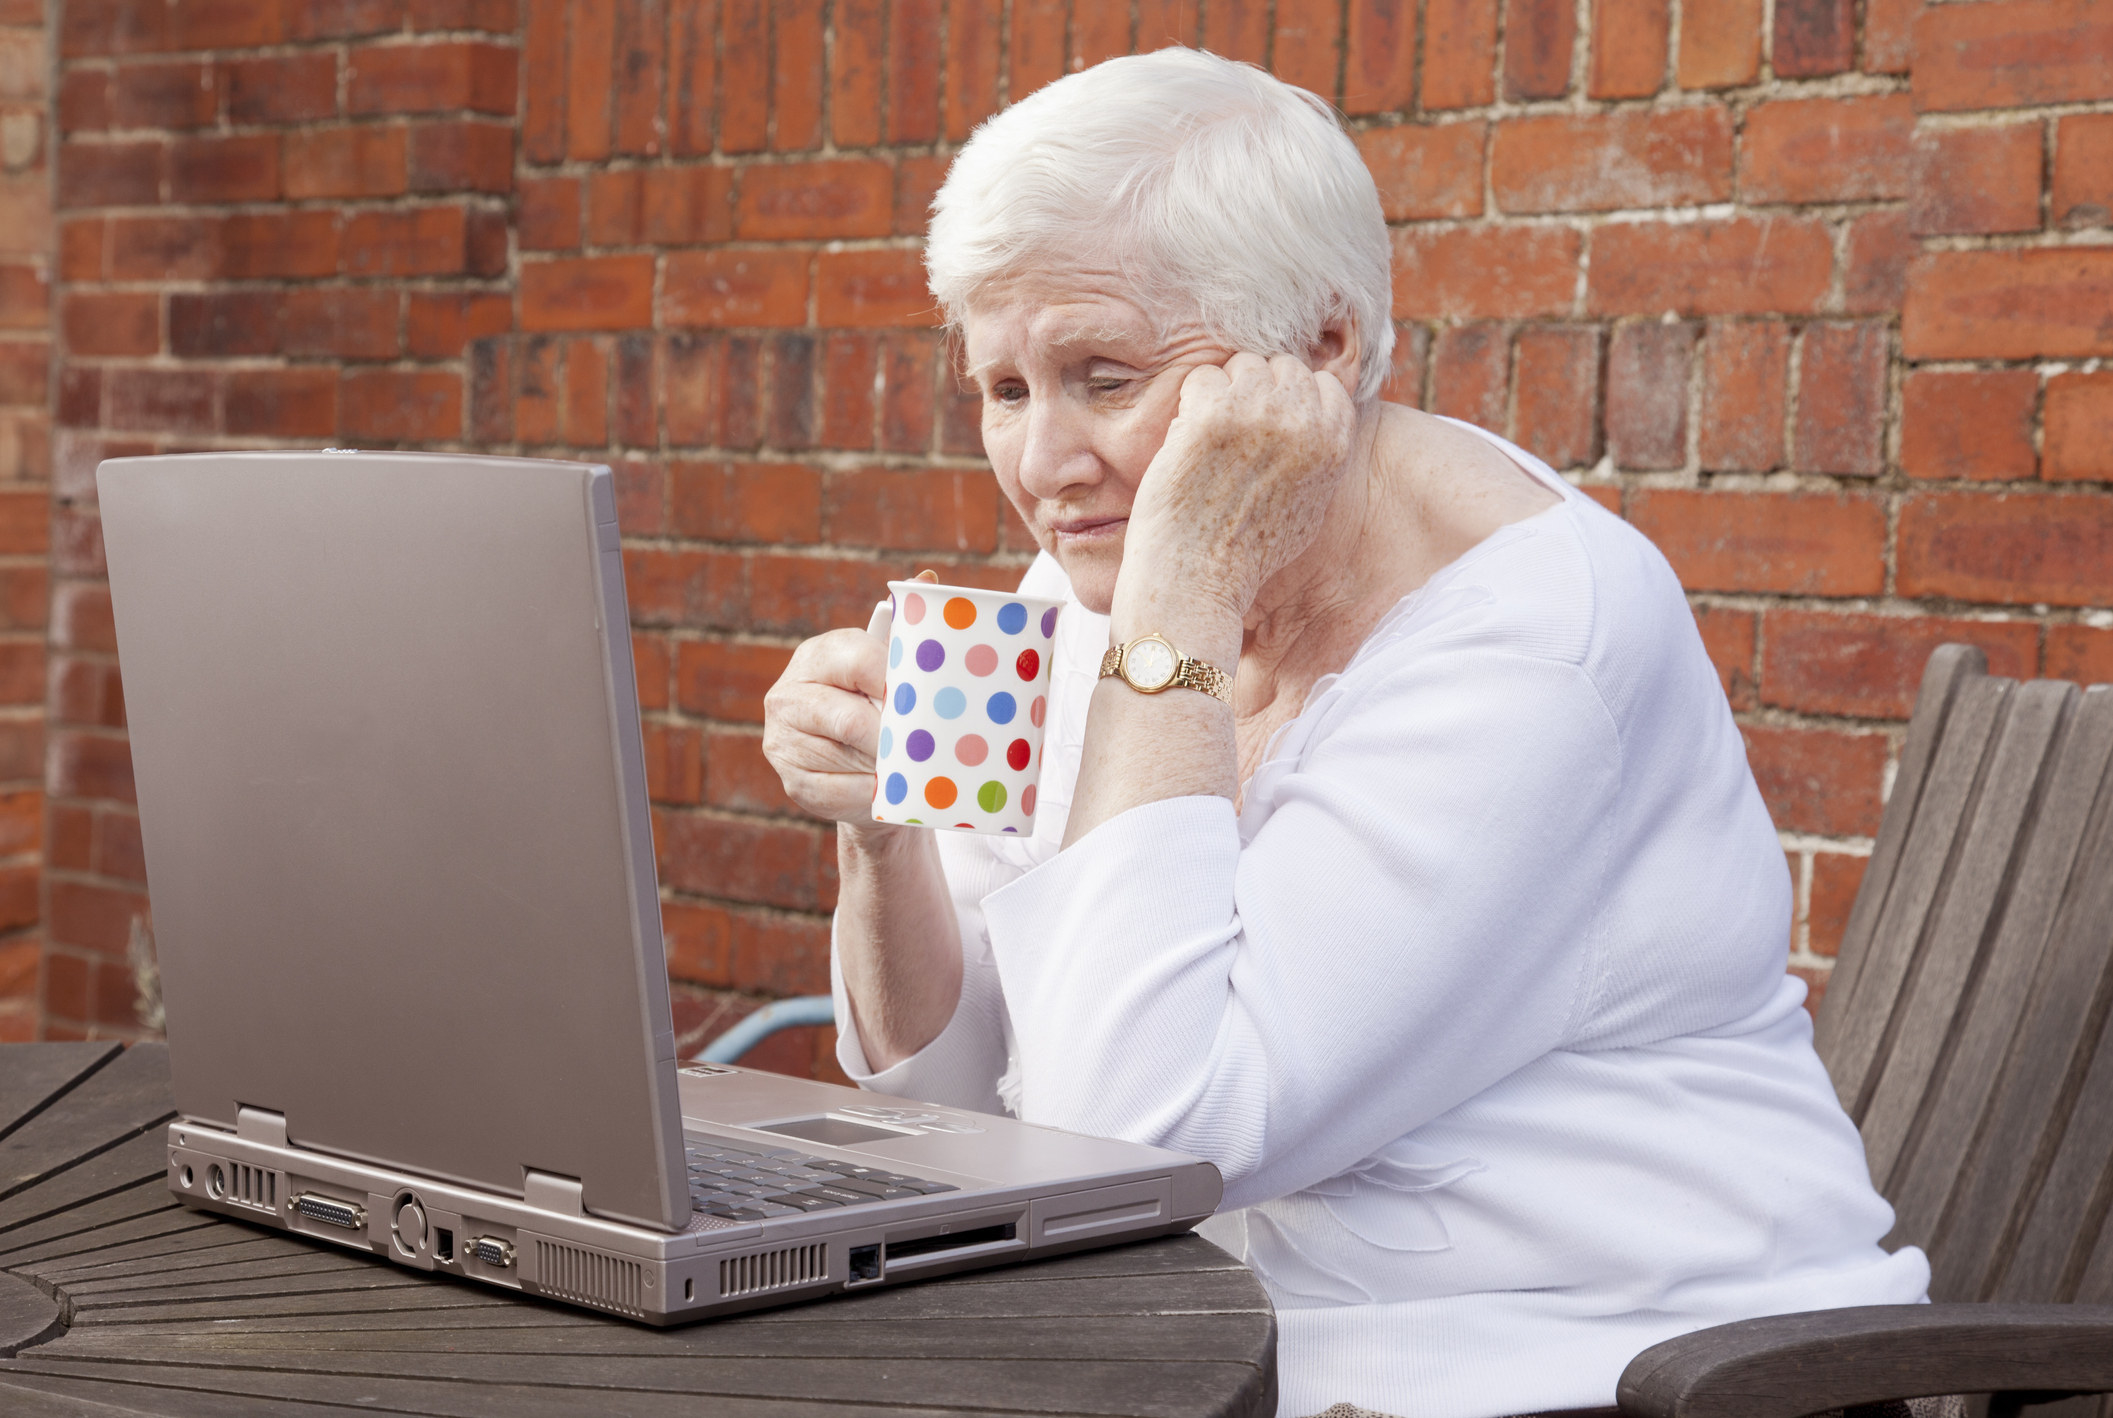 Older woman sitting at a laptop holding a mug and looking absorbed